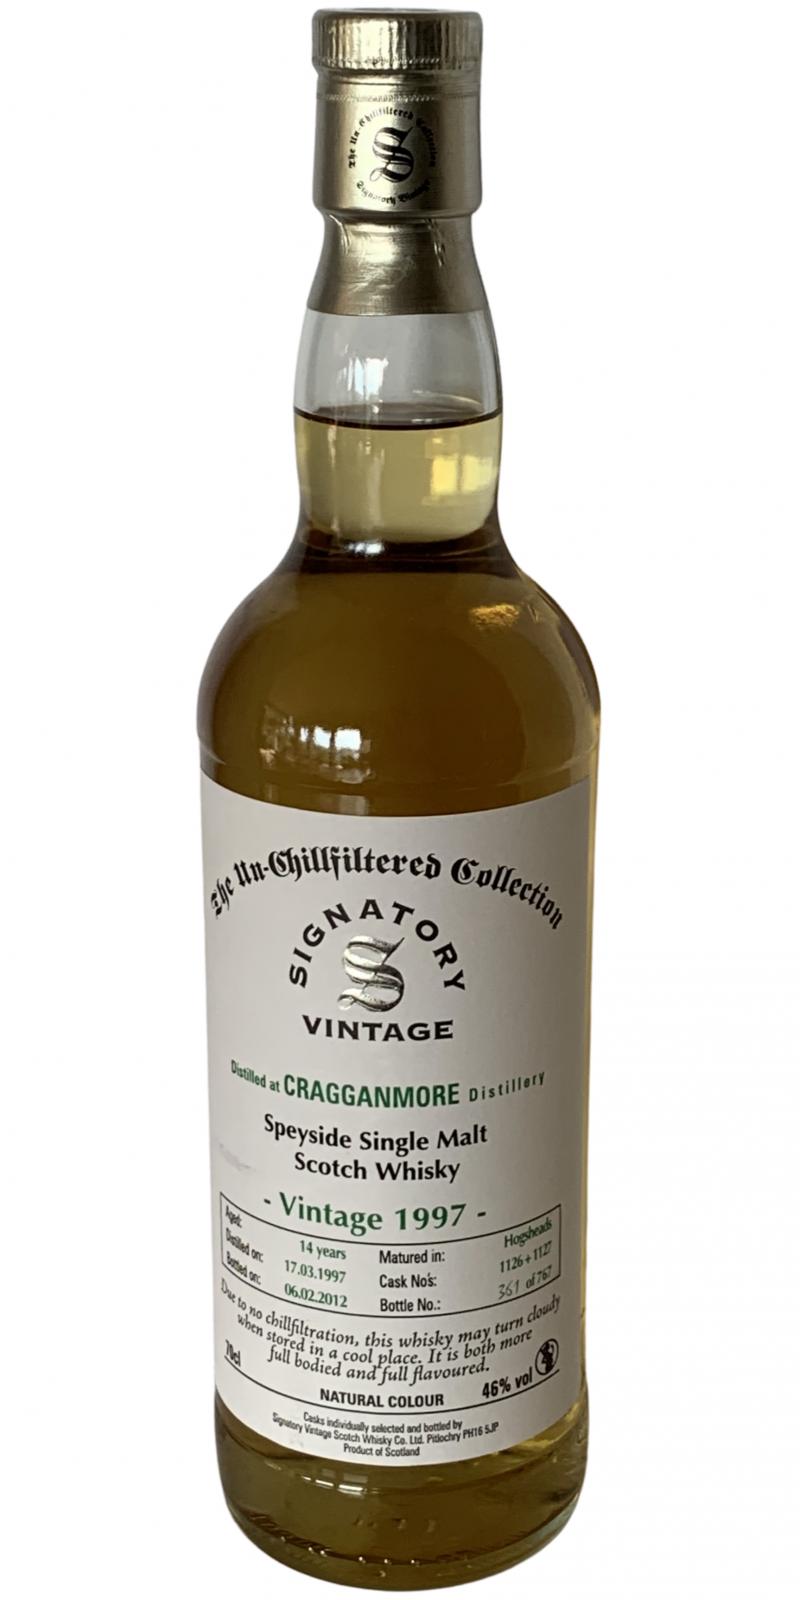 Cragganmore 1997 SV The Un-Chillfiltered Collection 1126 + 27 46% 700ml